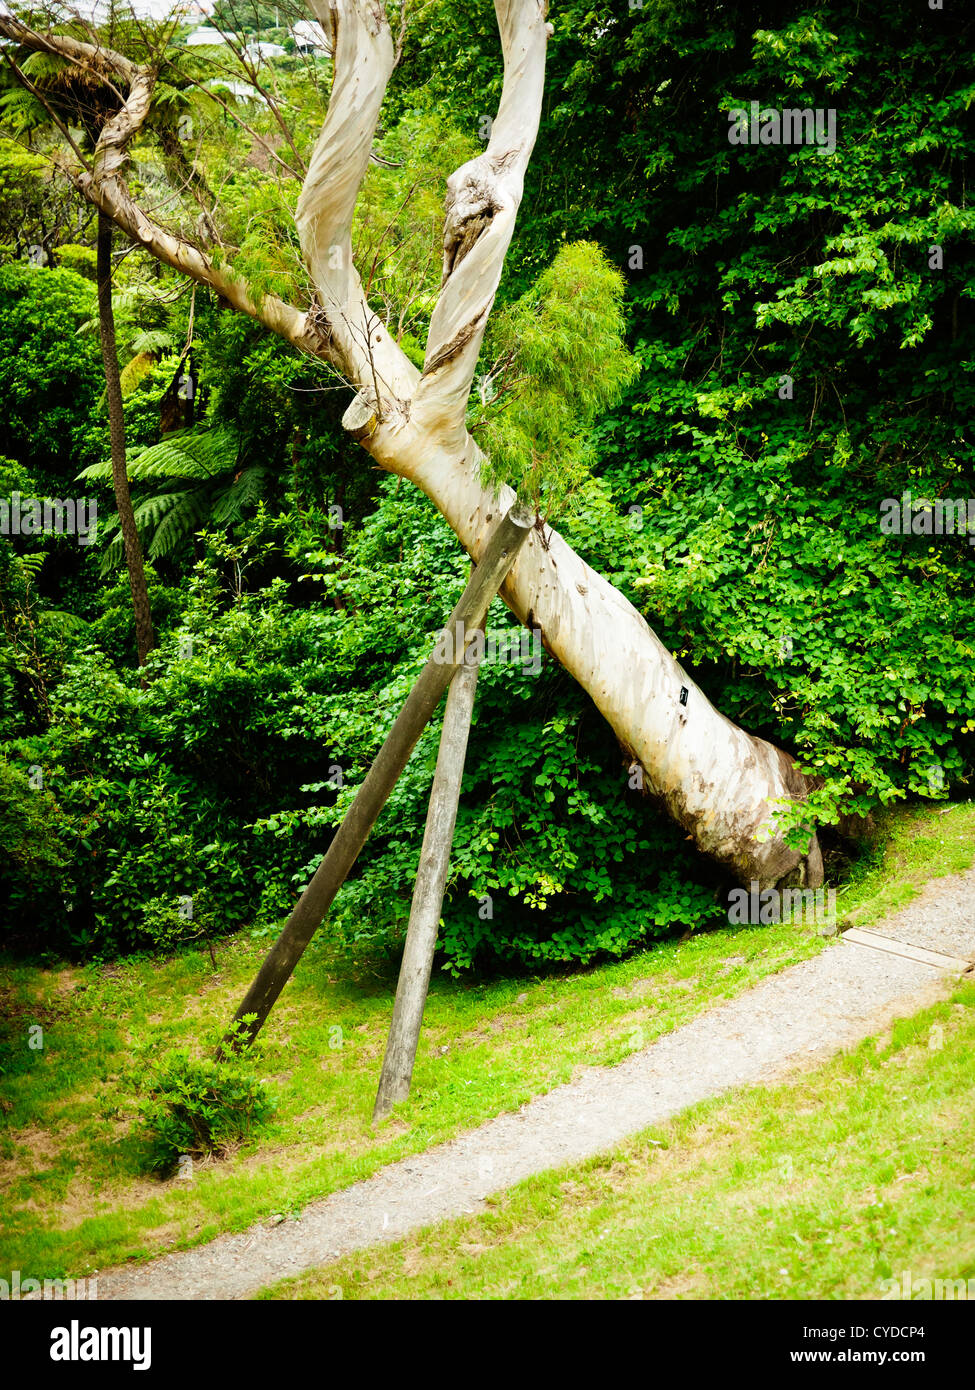 Support - tree held up by wooden poles, New Zealand. Stock Photo